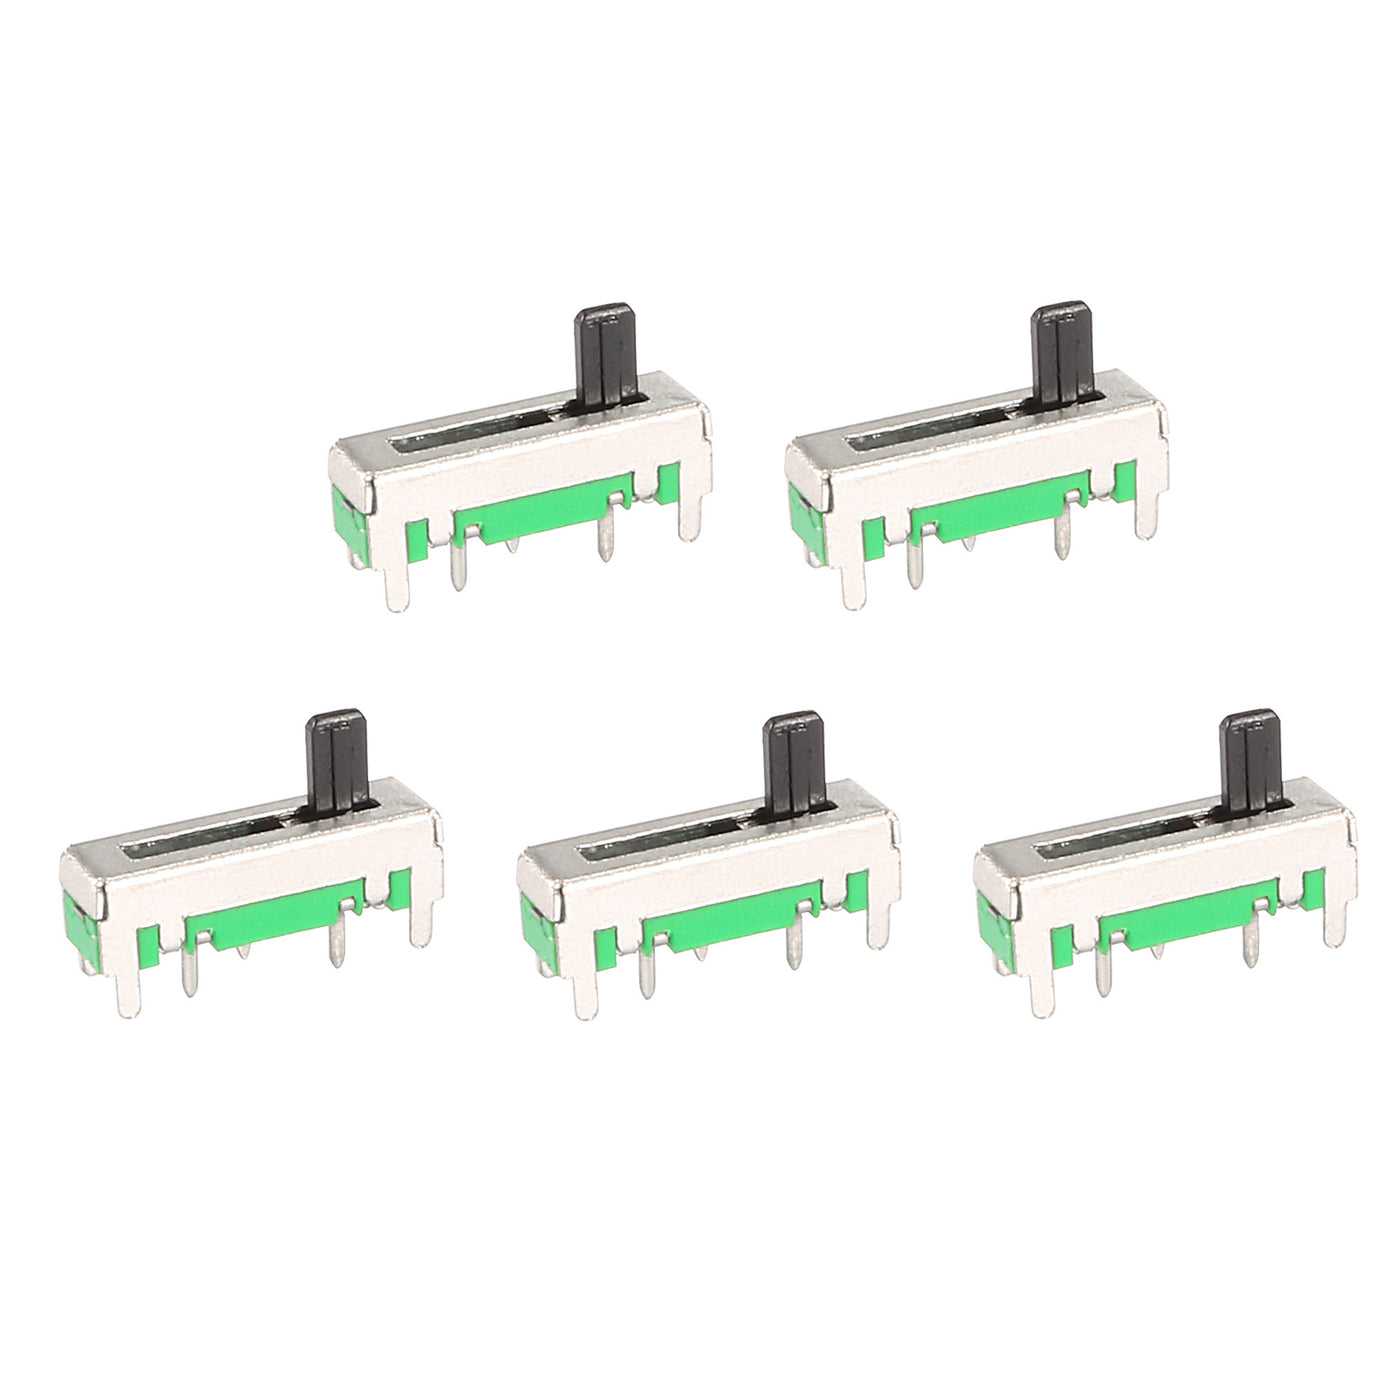 uxcell Uxcell 5pcs Fader Variable Resistors Mixer 18mm Straight Slide Potentiometer B503  B50K Ohm Linear Single Potentiometers for Dimming Tuning